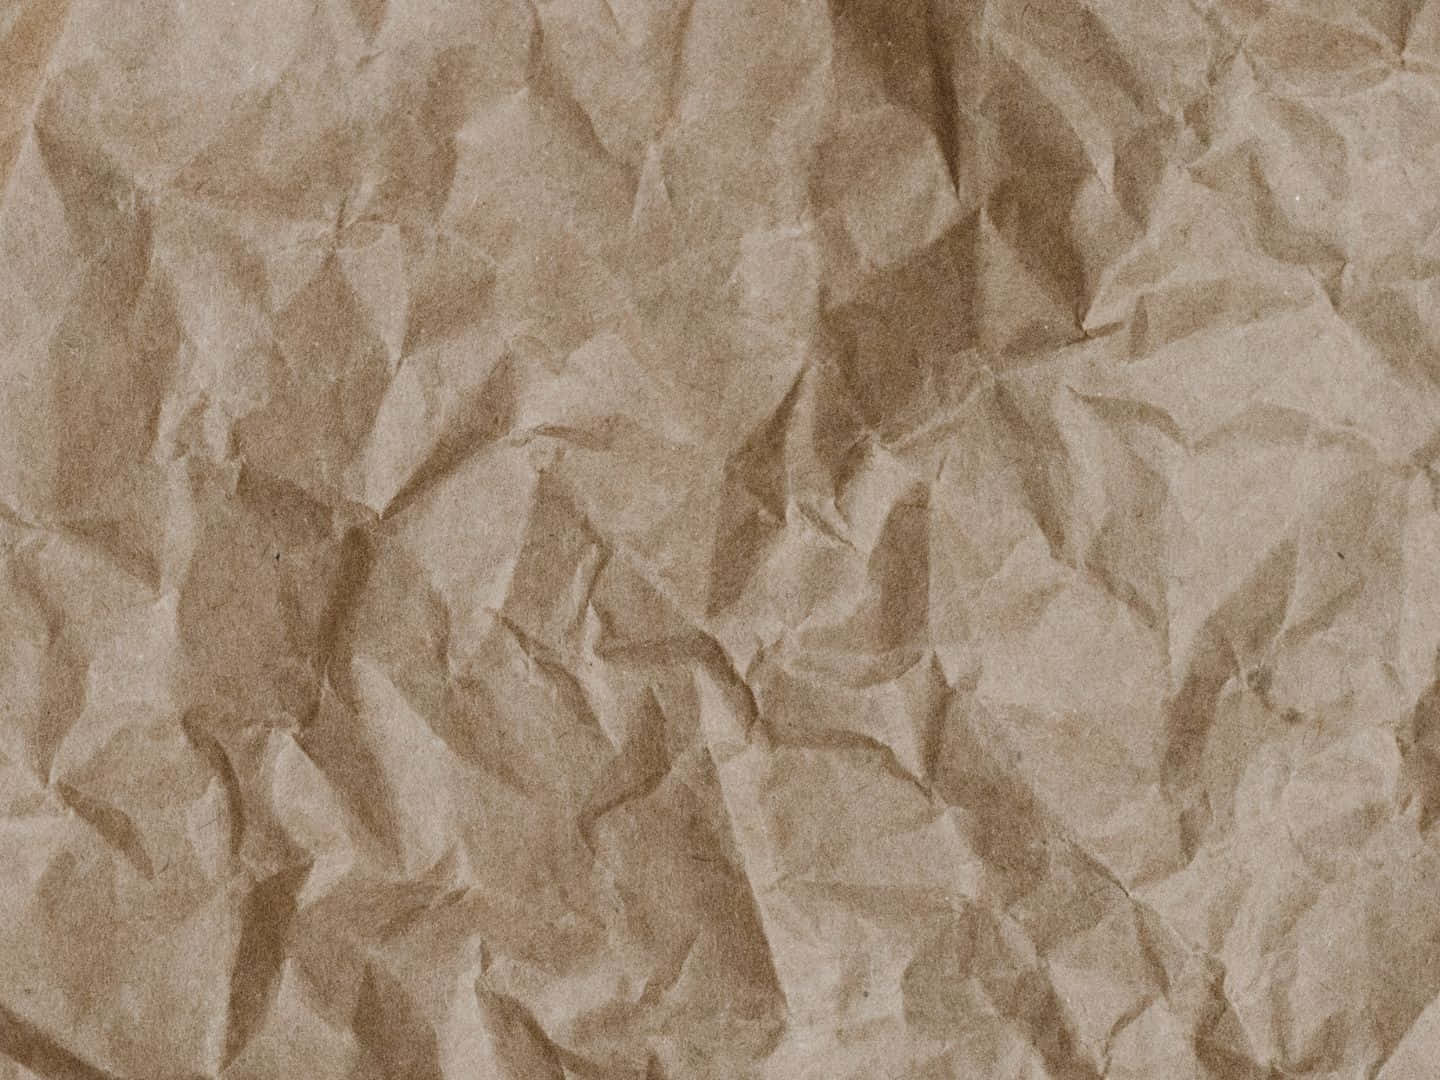 Parchment Background With Heavy Creases